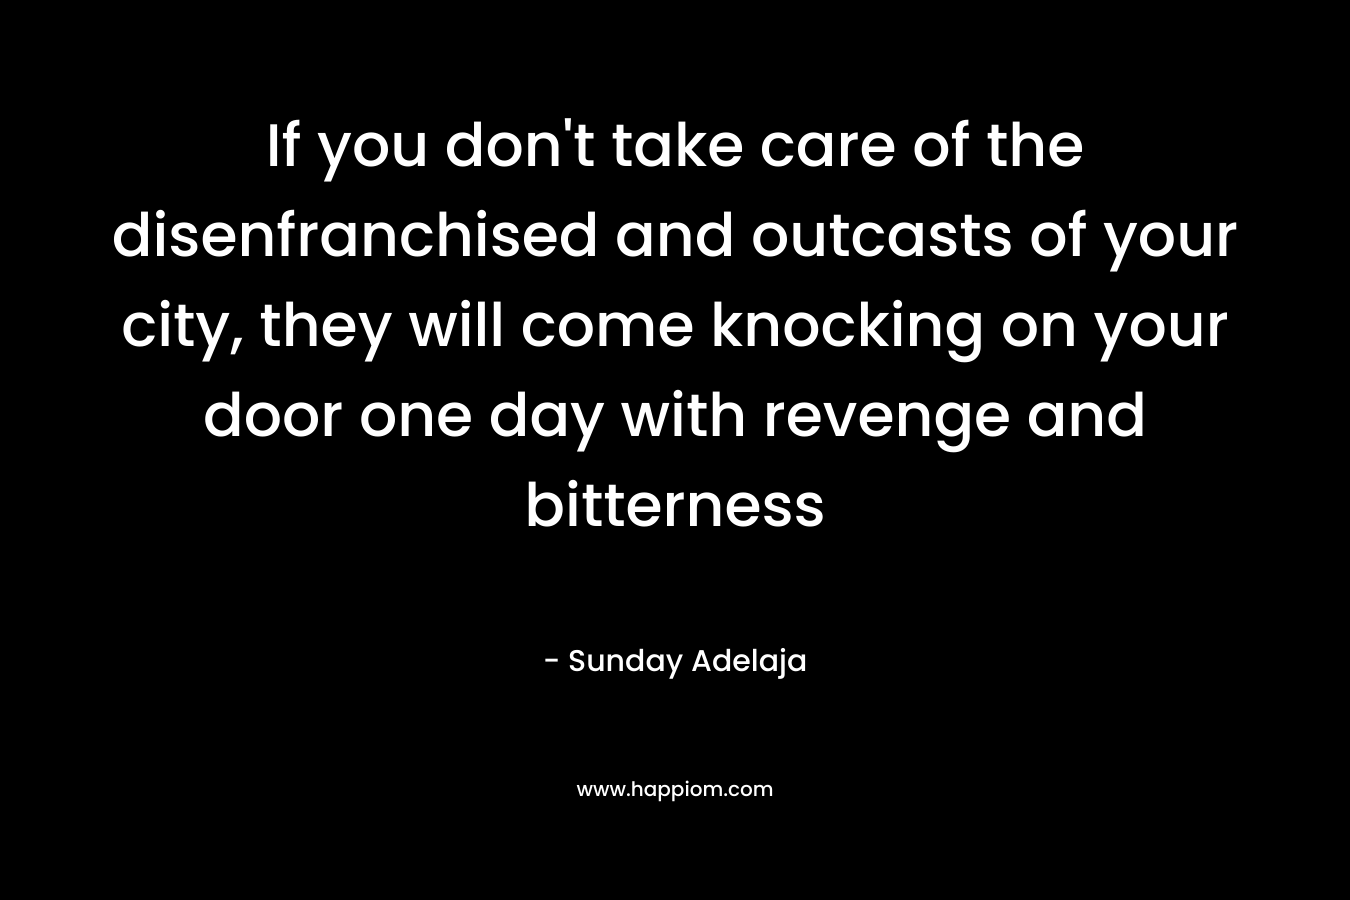 If you don’t take care of the disenfranchised and outcasts of your city, they will come knocking on your door one day with revenge and bitterness – Sunday Adelaja